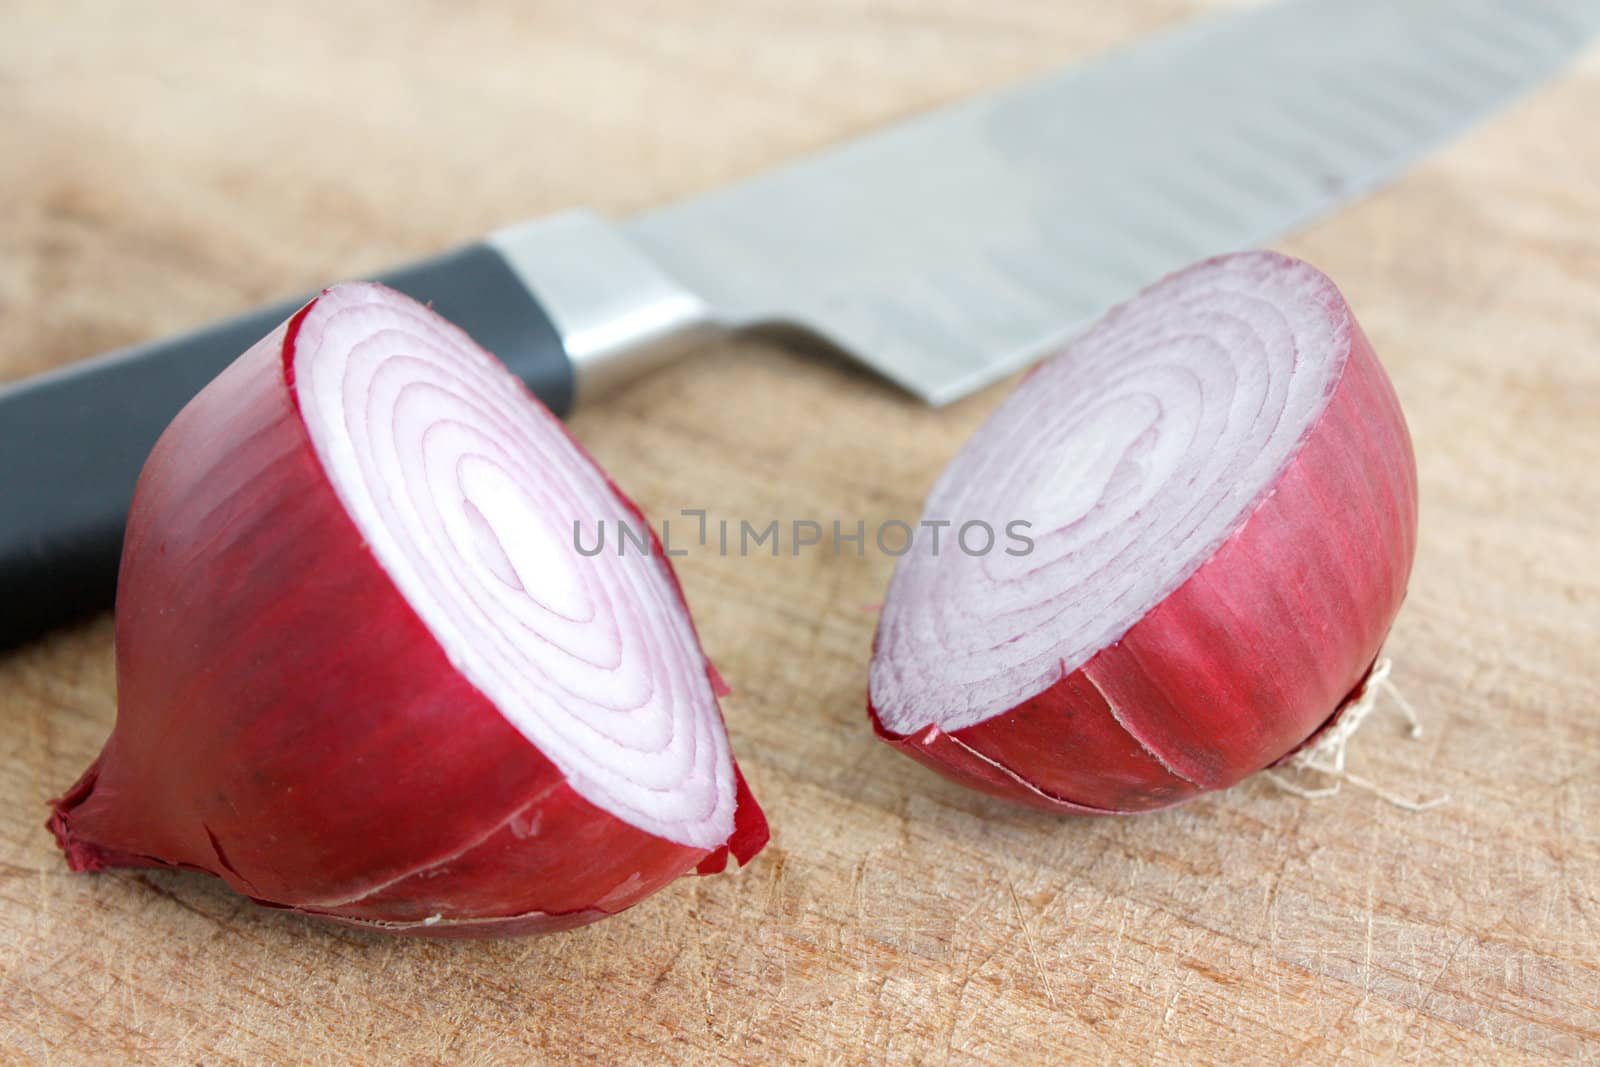 Red onion by leeser